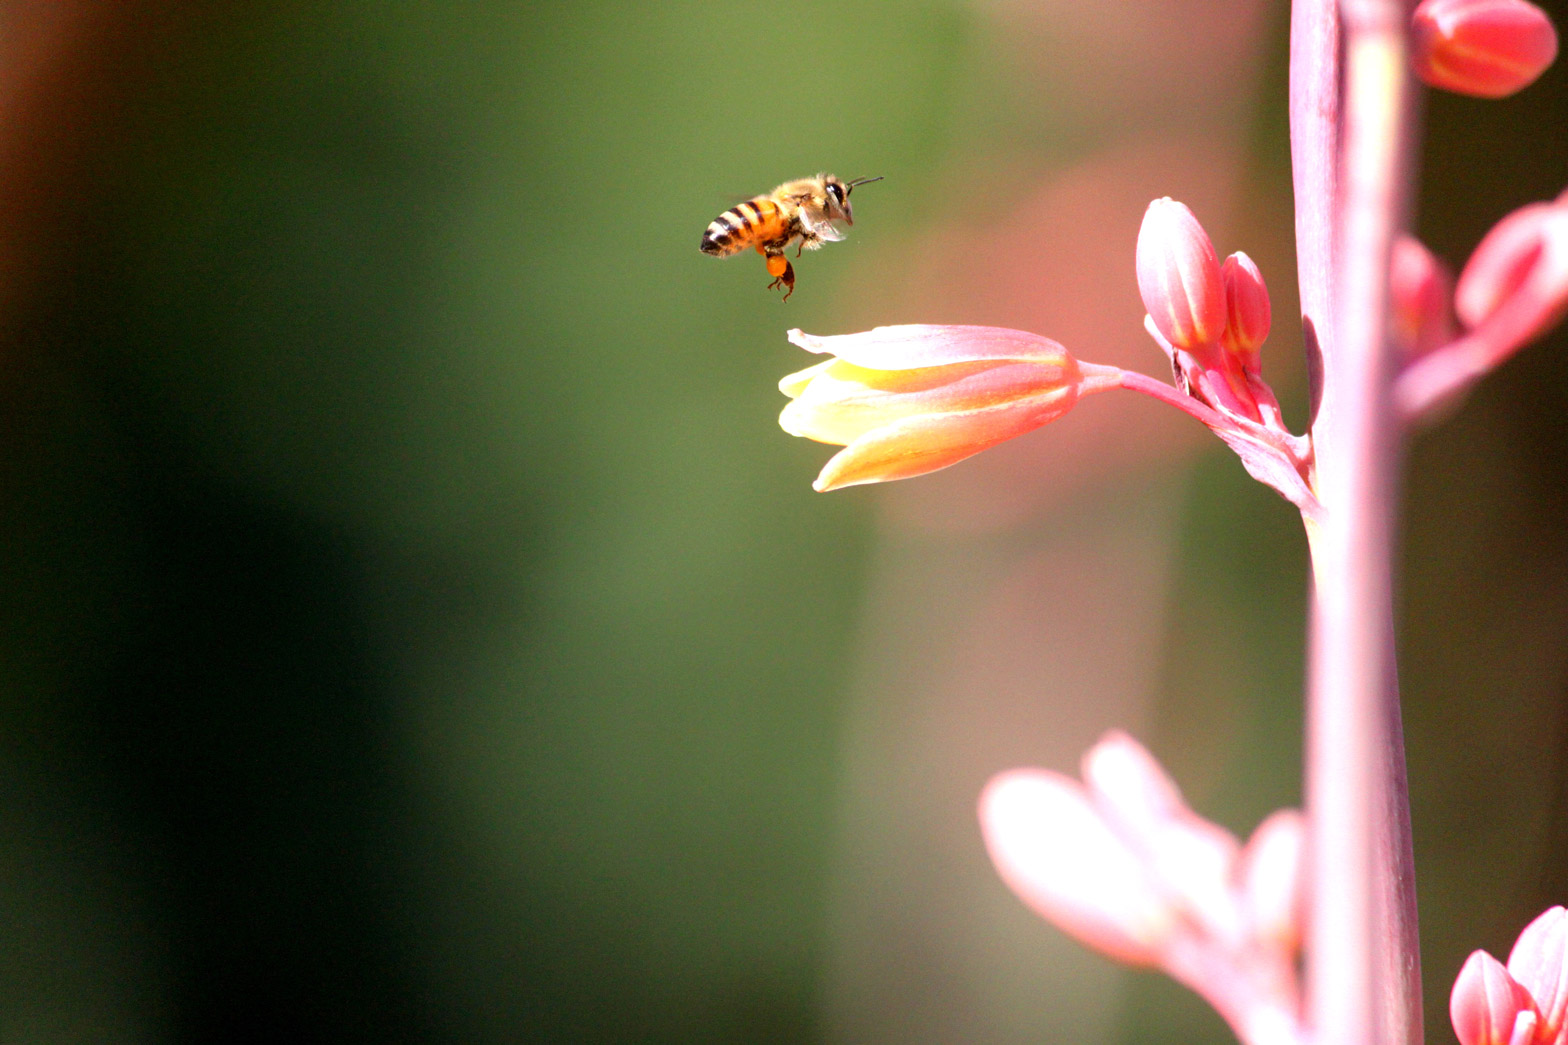 A bee visits Red Hesperaloe flowers.